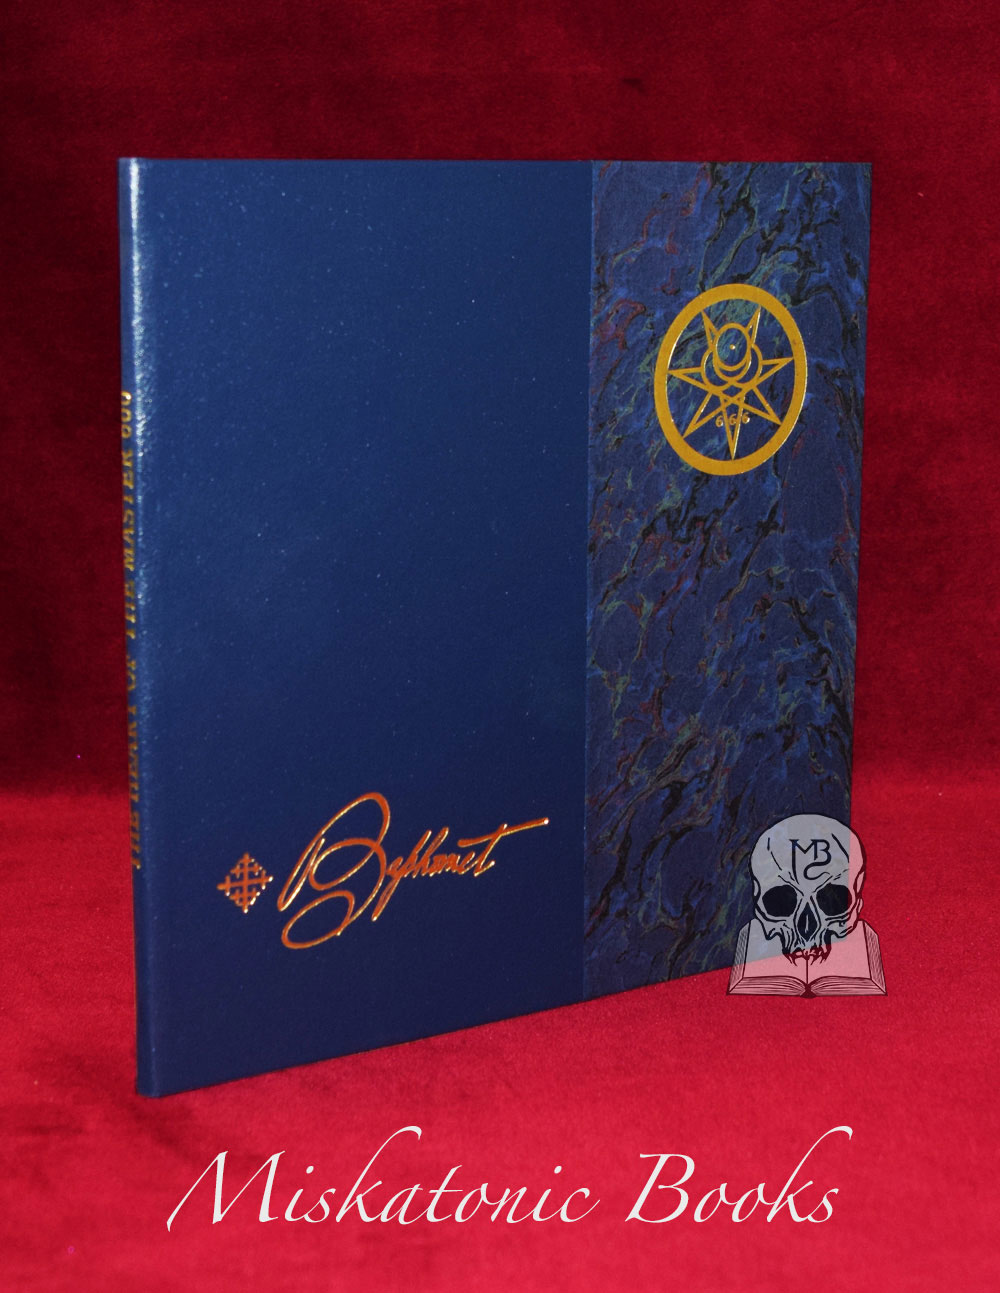 THE HEART OF THE MASTER by Aleister Crowley - Half Bound in Leather and Marbled Boards Limited Edition